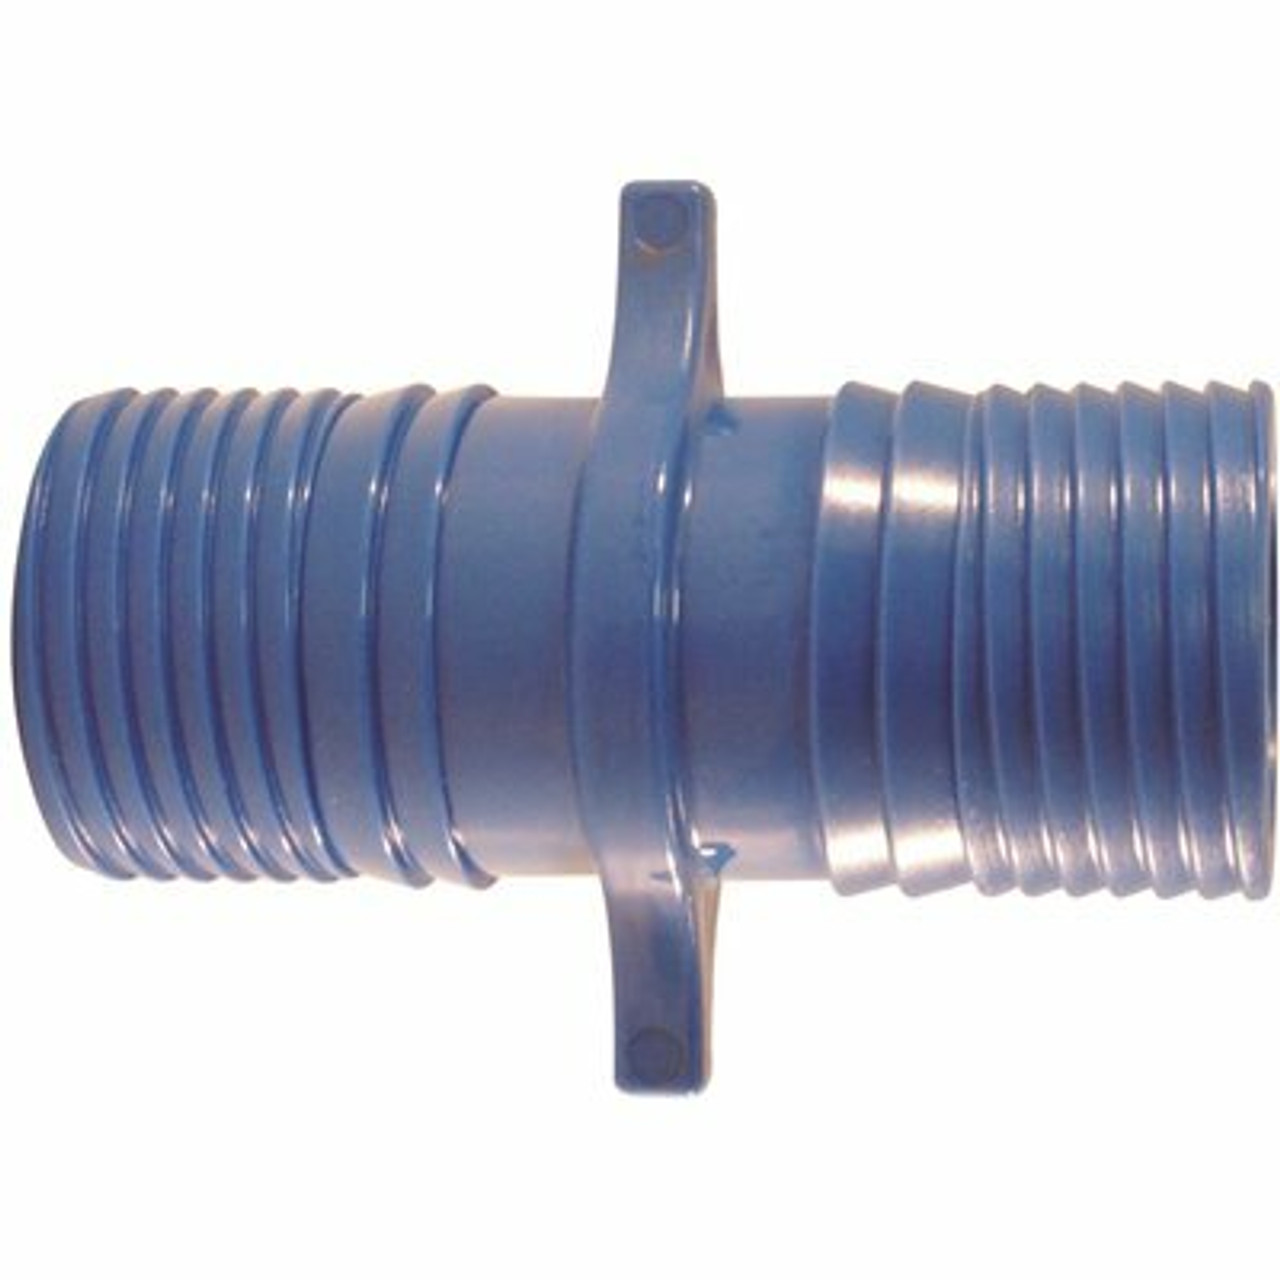 Apollo 1-1/4 In. X 1-1/4 In. Blue Twister Polypropylene Insert Coupling